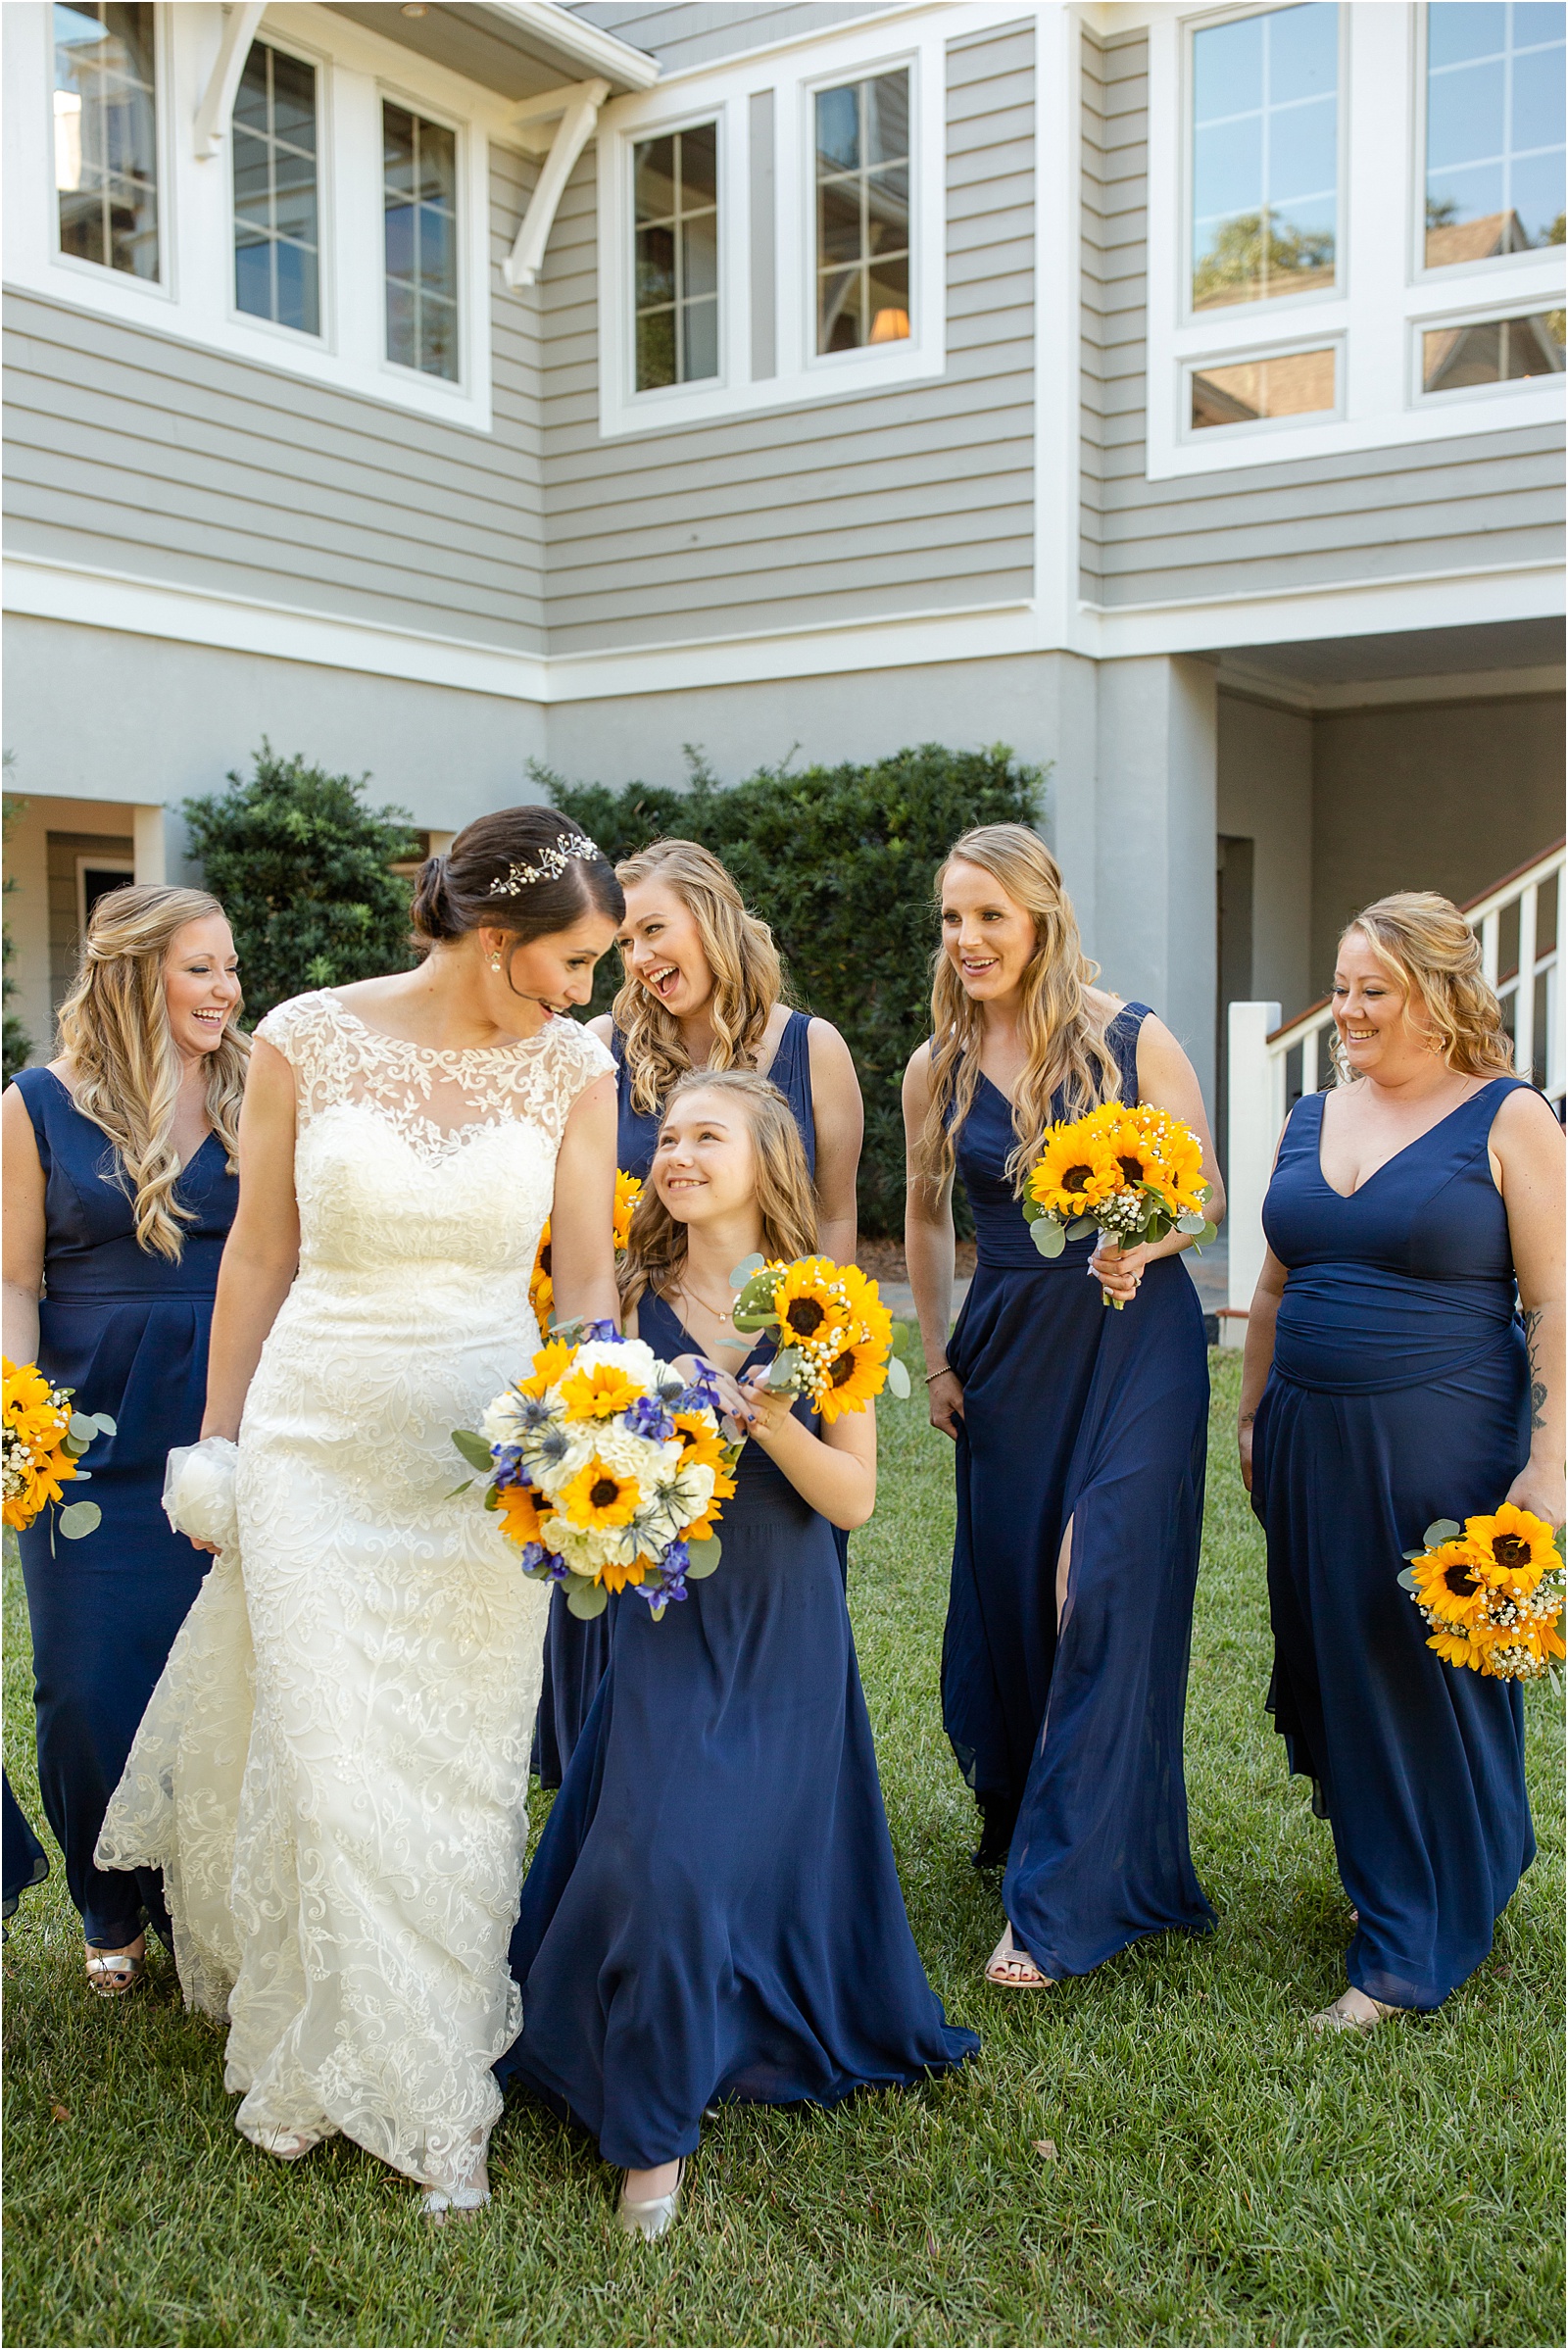 bride and her bridesmaids in blue dresses laughing as they walk